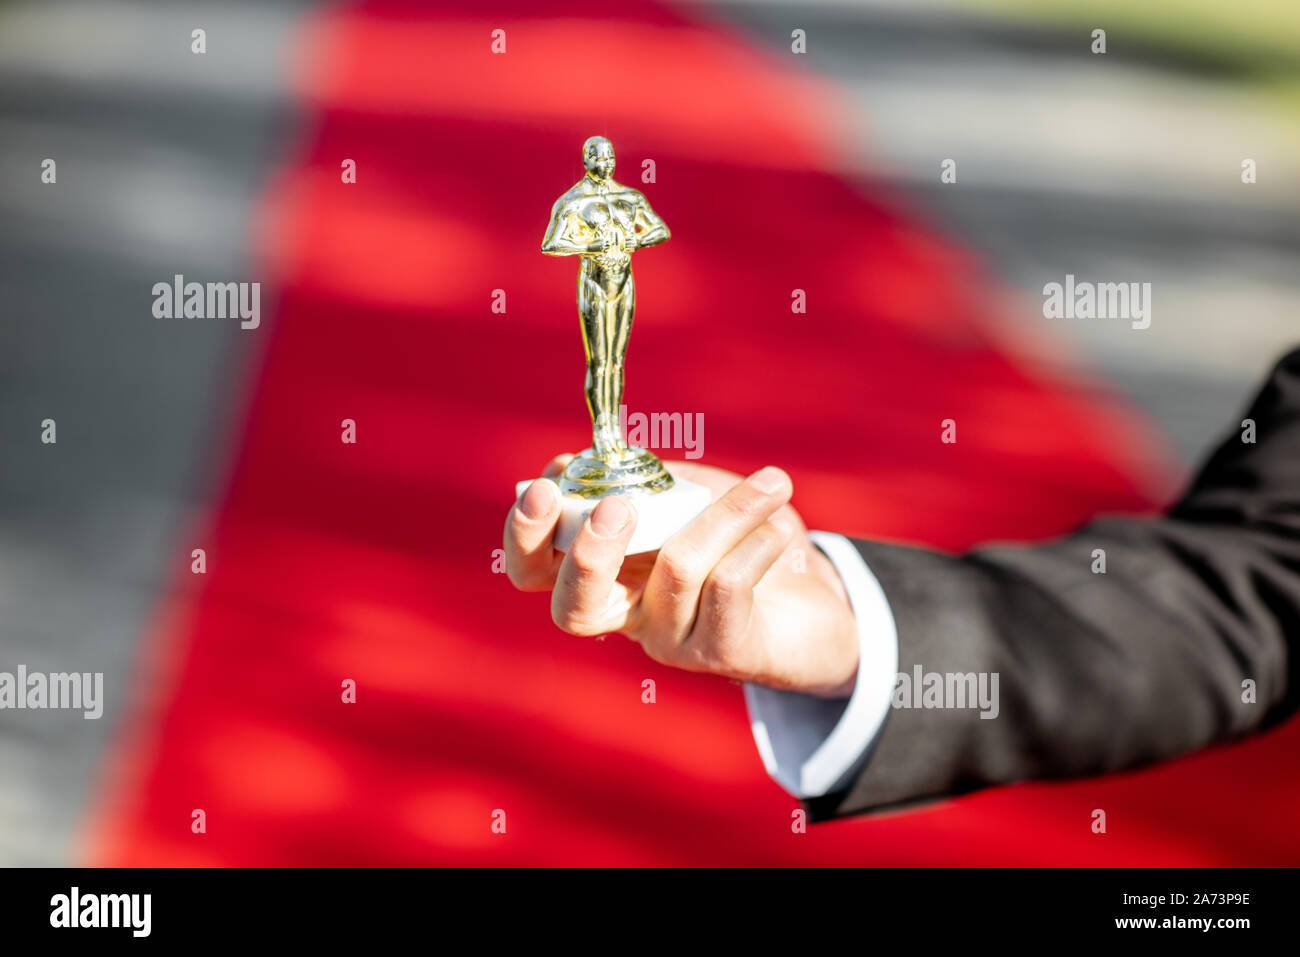 Man holding famous film award statue on the red carpet background, close-up view Stock Photo